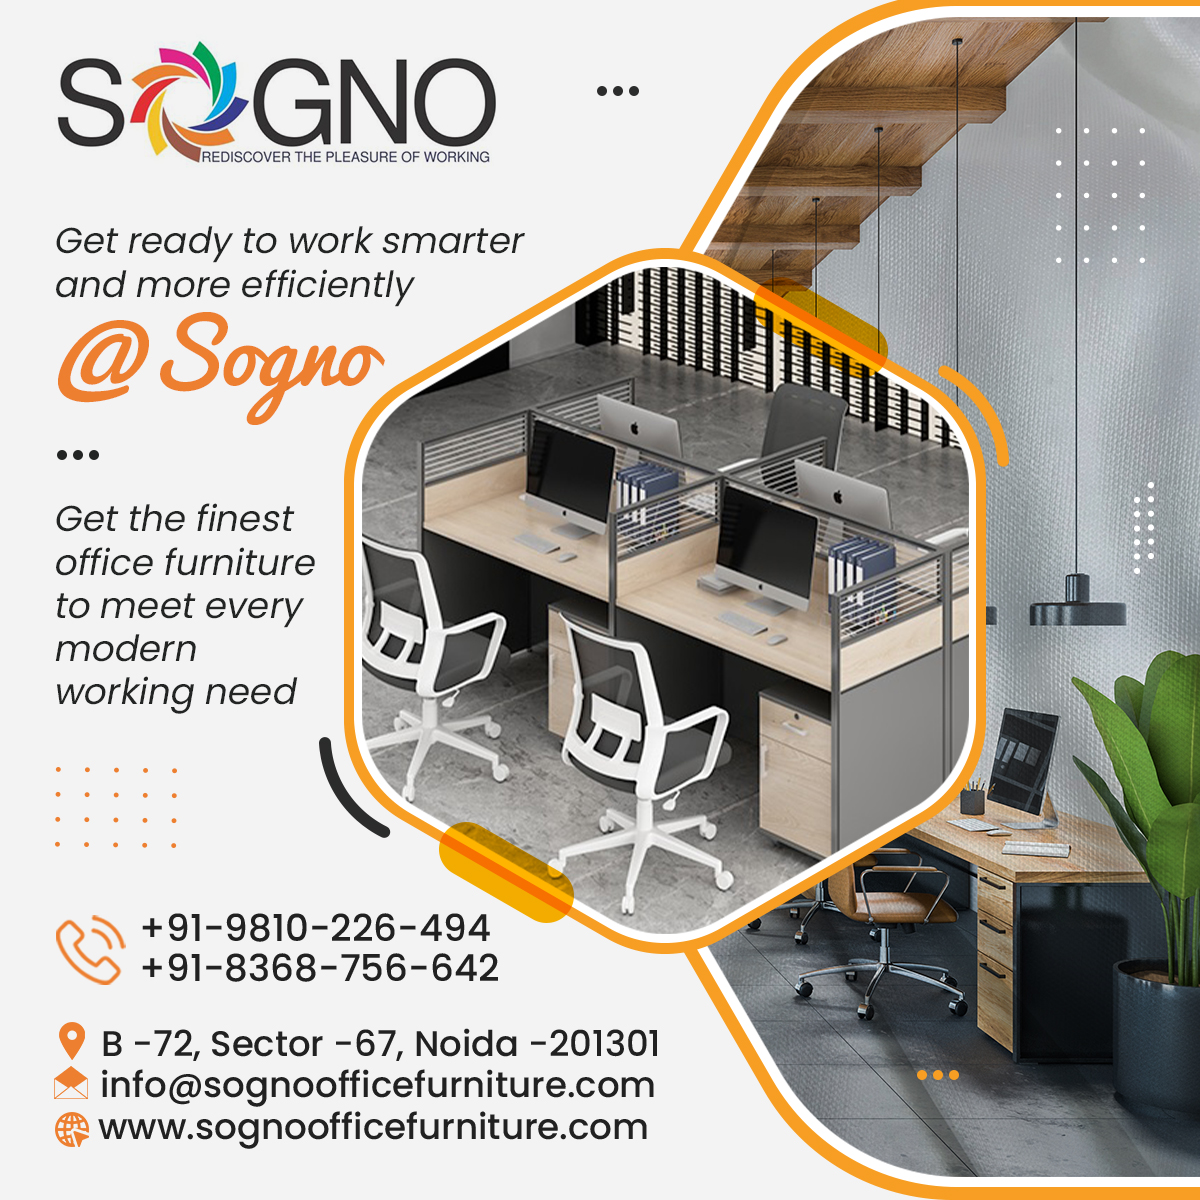 Get ready to experience the best office space with Sogno! 

Contact WhatsApp:- +91-8368-756-642 / +91-9810-226-494
.
.
#sognoofficefurniture #officefurniture #business #manufacturer #officefurniturecenter #interiørdesign #chairs #chairdesign #officechairs #workstationsetup